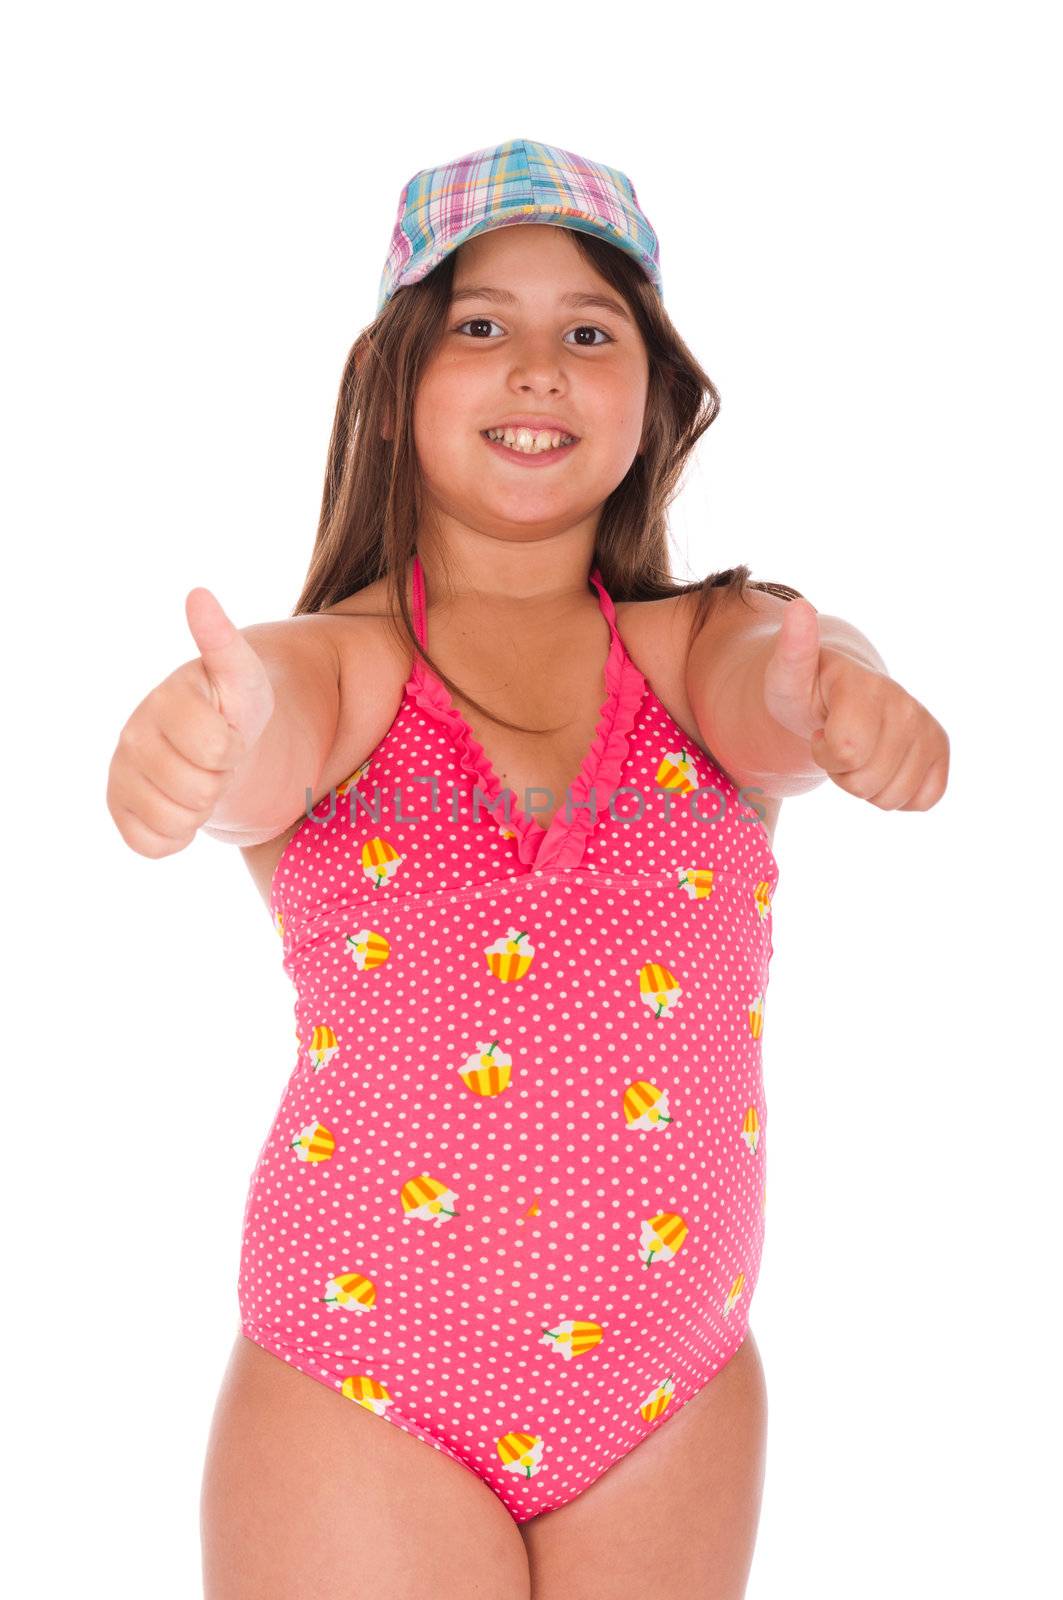 beautiful brunette teenage girl in swimsuit showing thumbs up (isolated on white background)